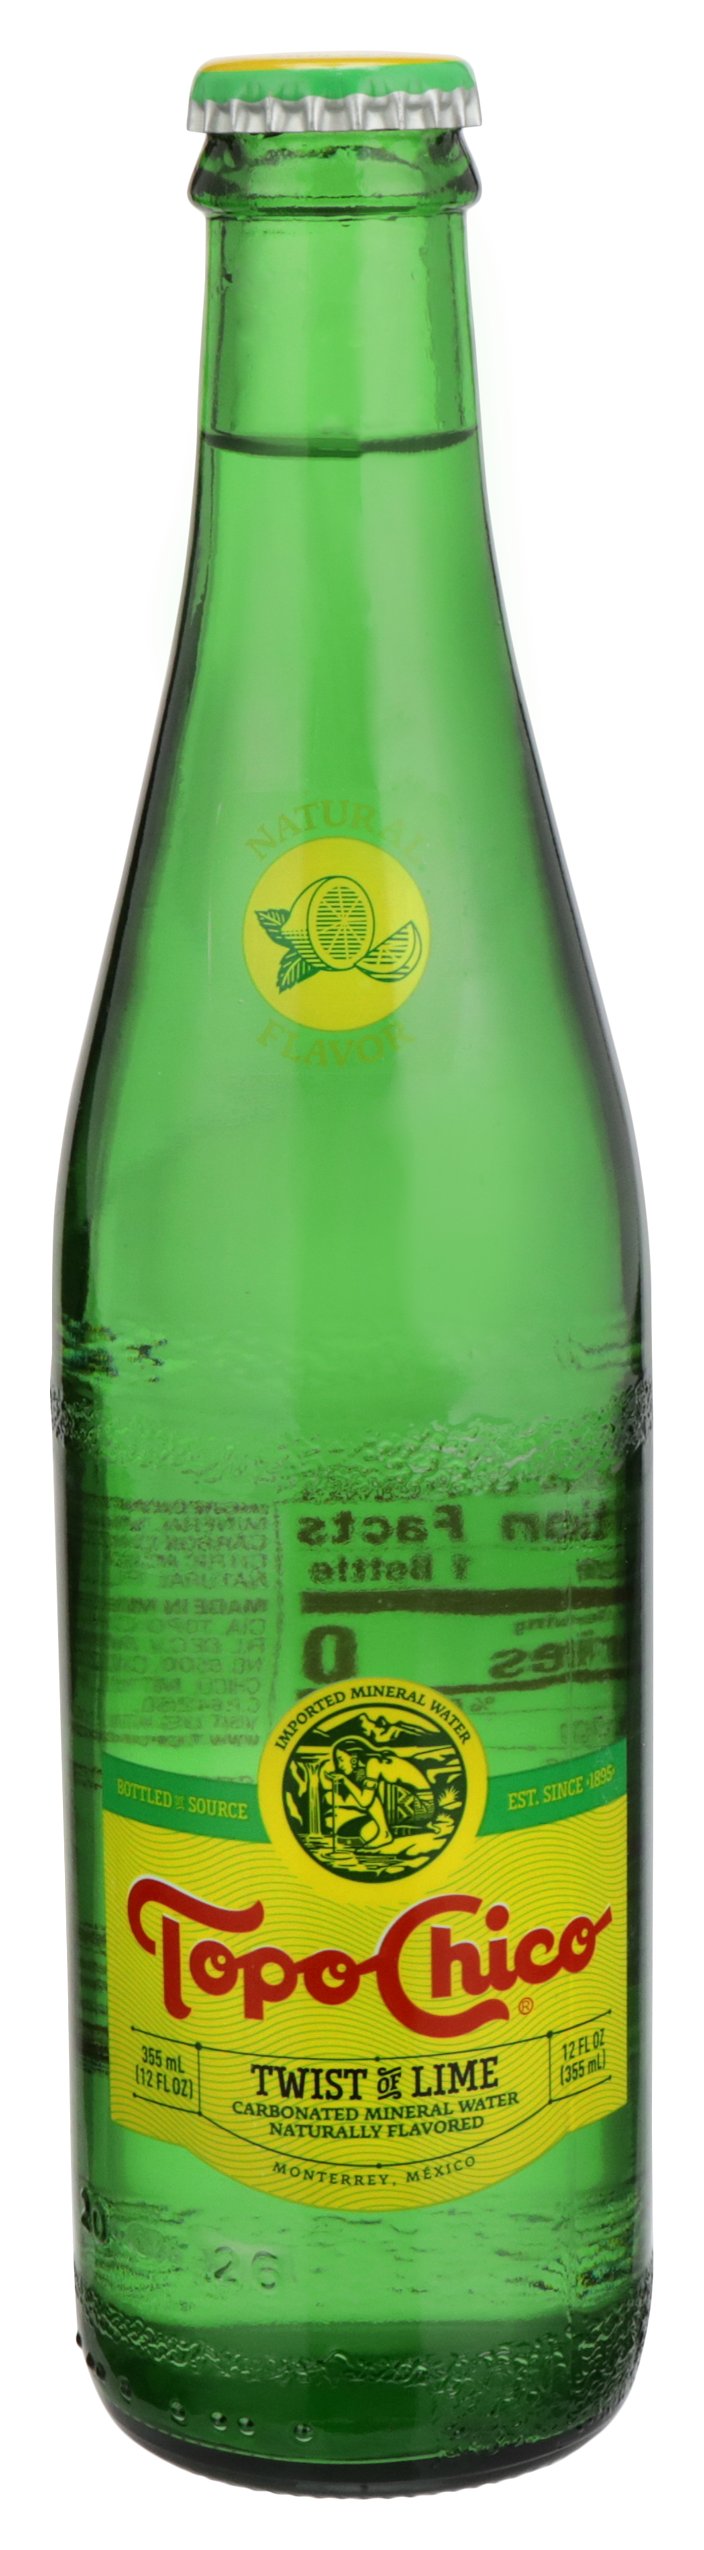 TOPO CHICO WATR MINERAL W LIME GLASS - Case of 24